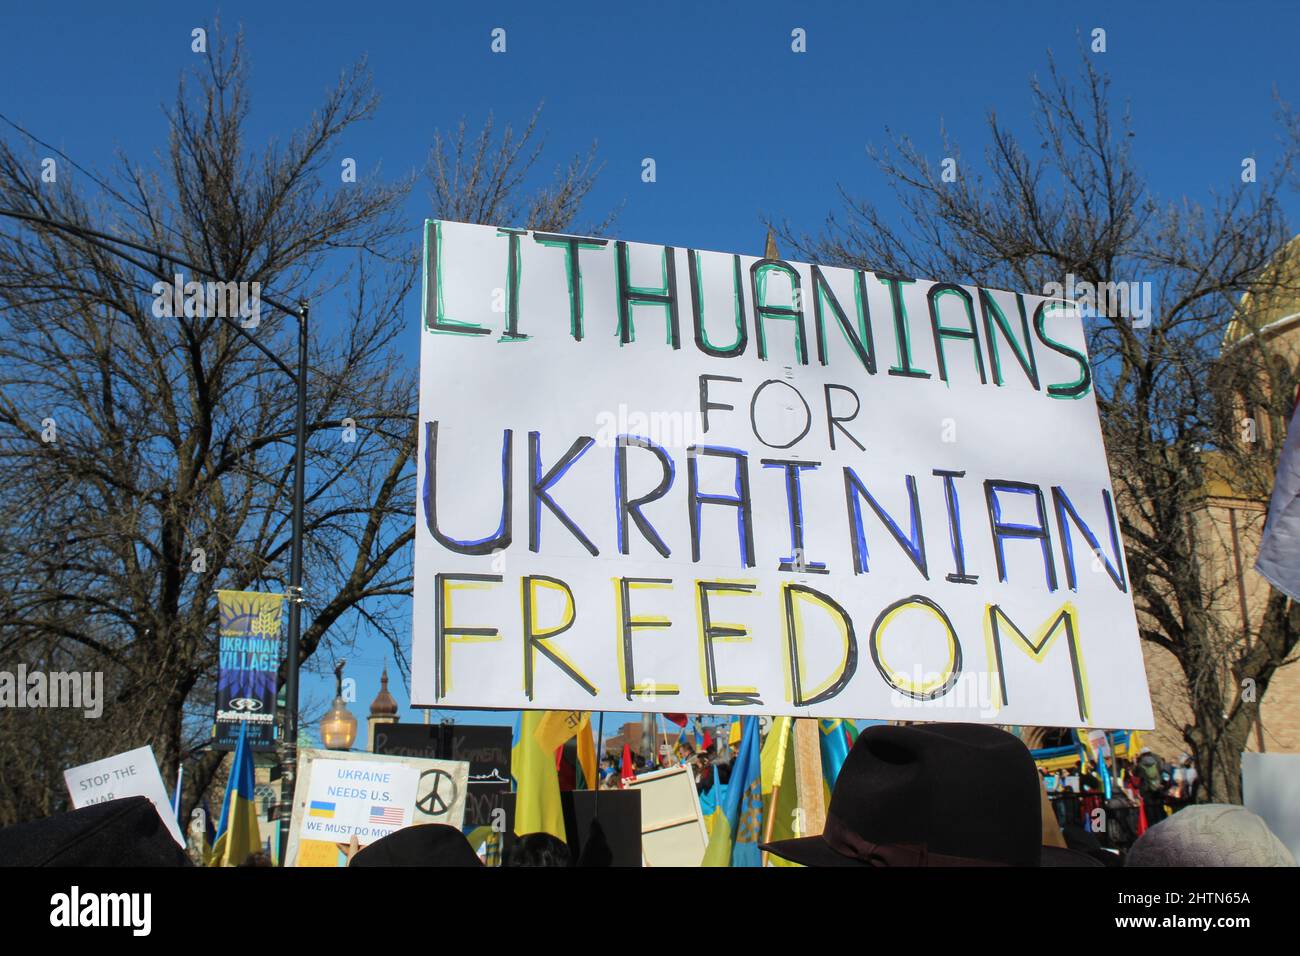 Lithuanians for Ukrainian Freedom protest sign at Ukrainian Village in Chicago Stock Photo